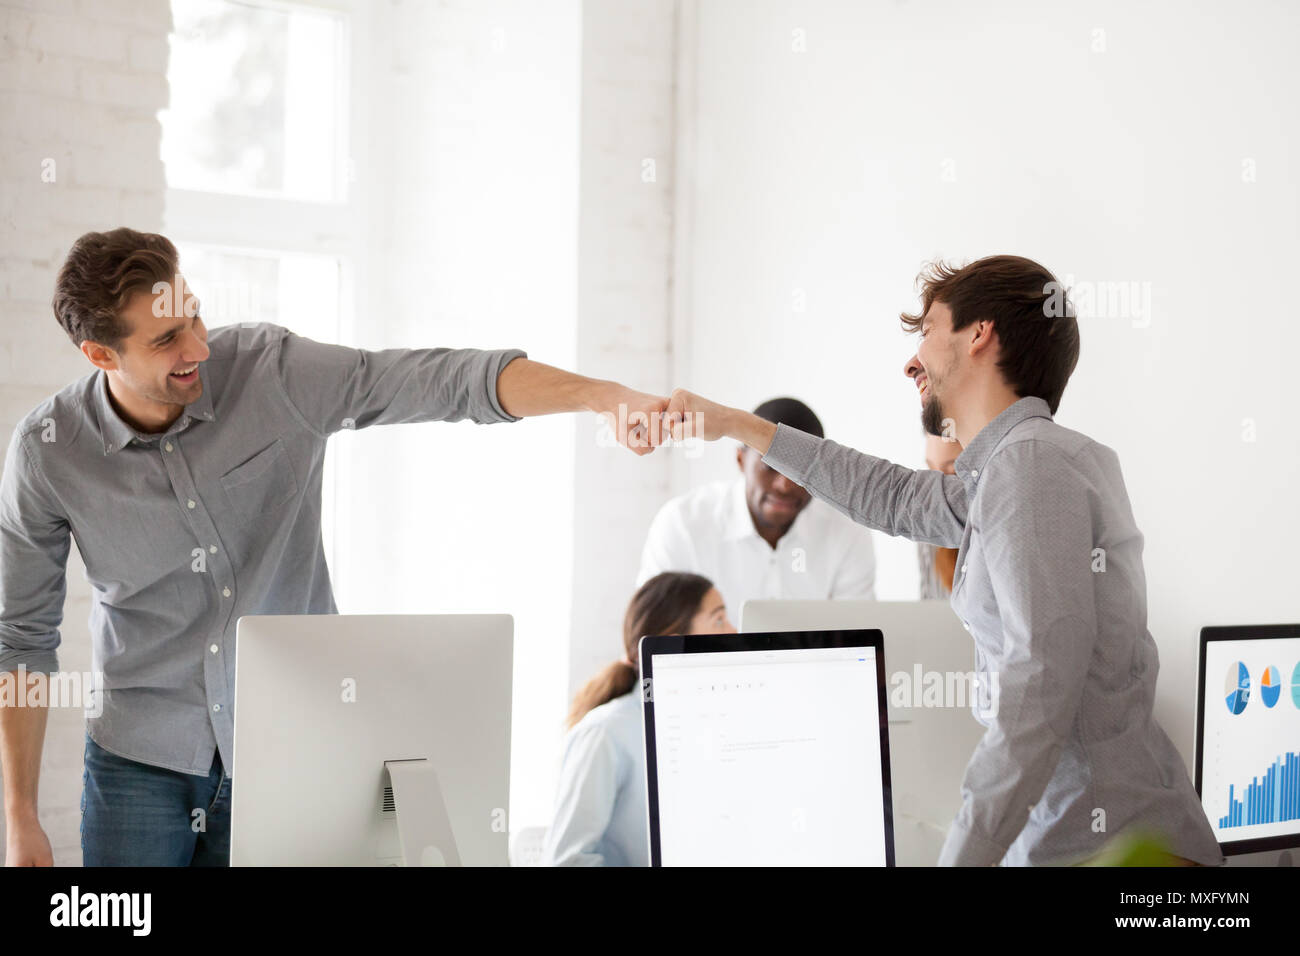 Smiling males giving fist bumps excited by shared goal achieveme Stock Photo